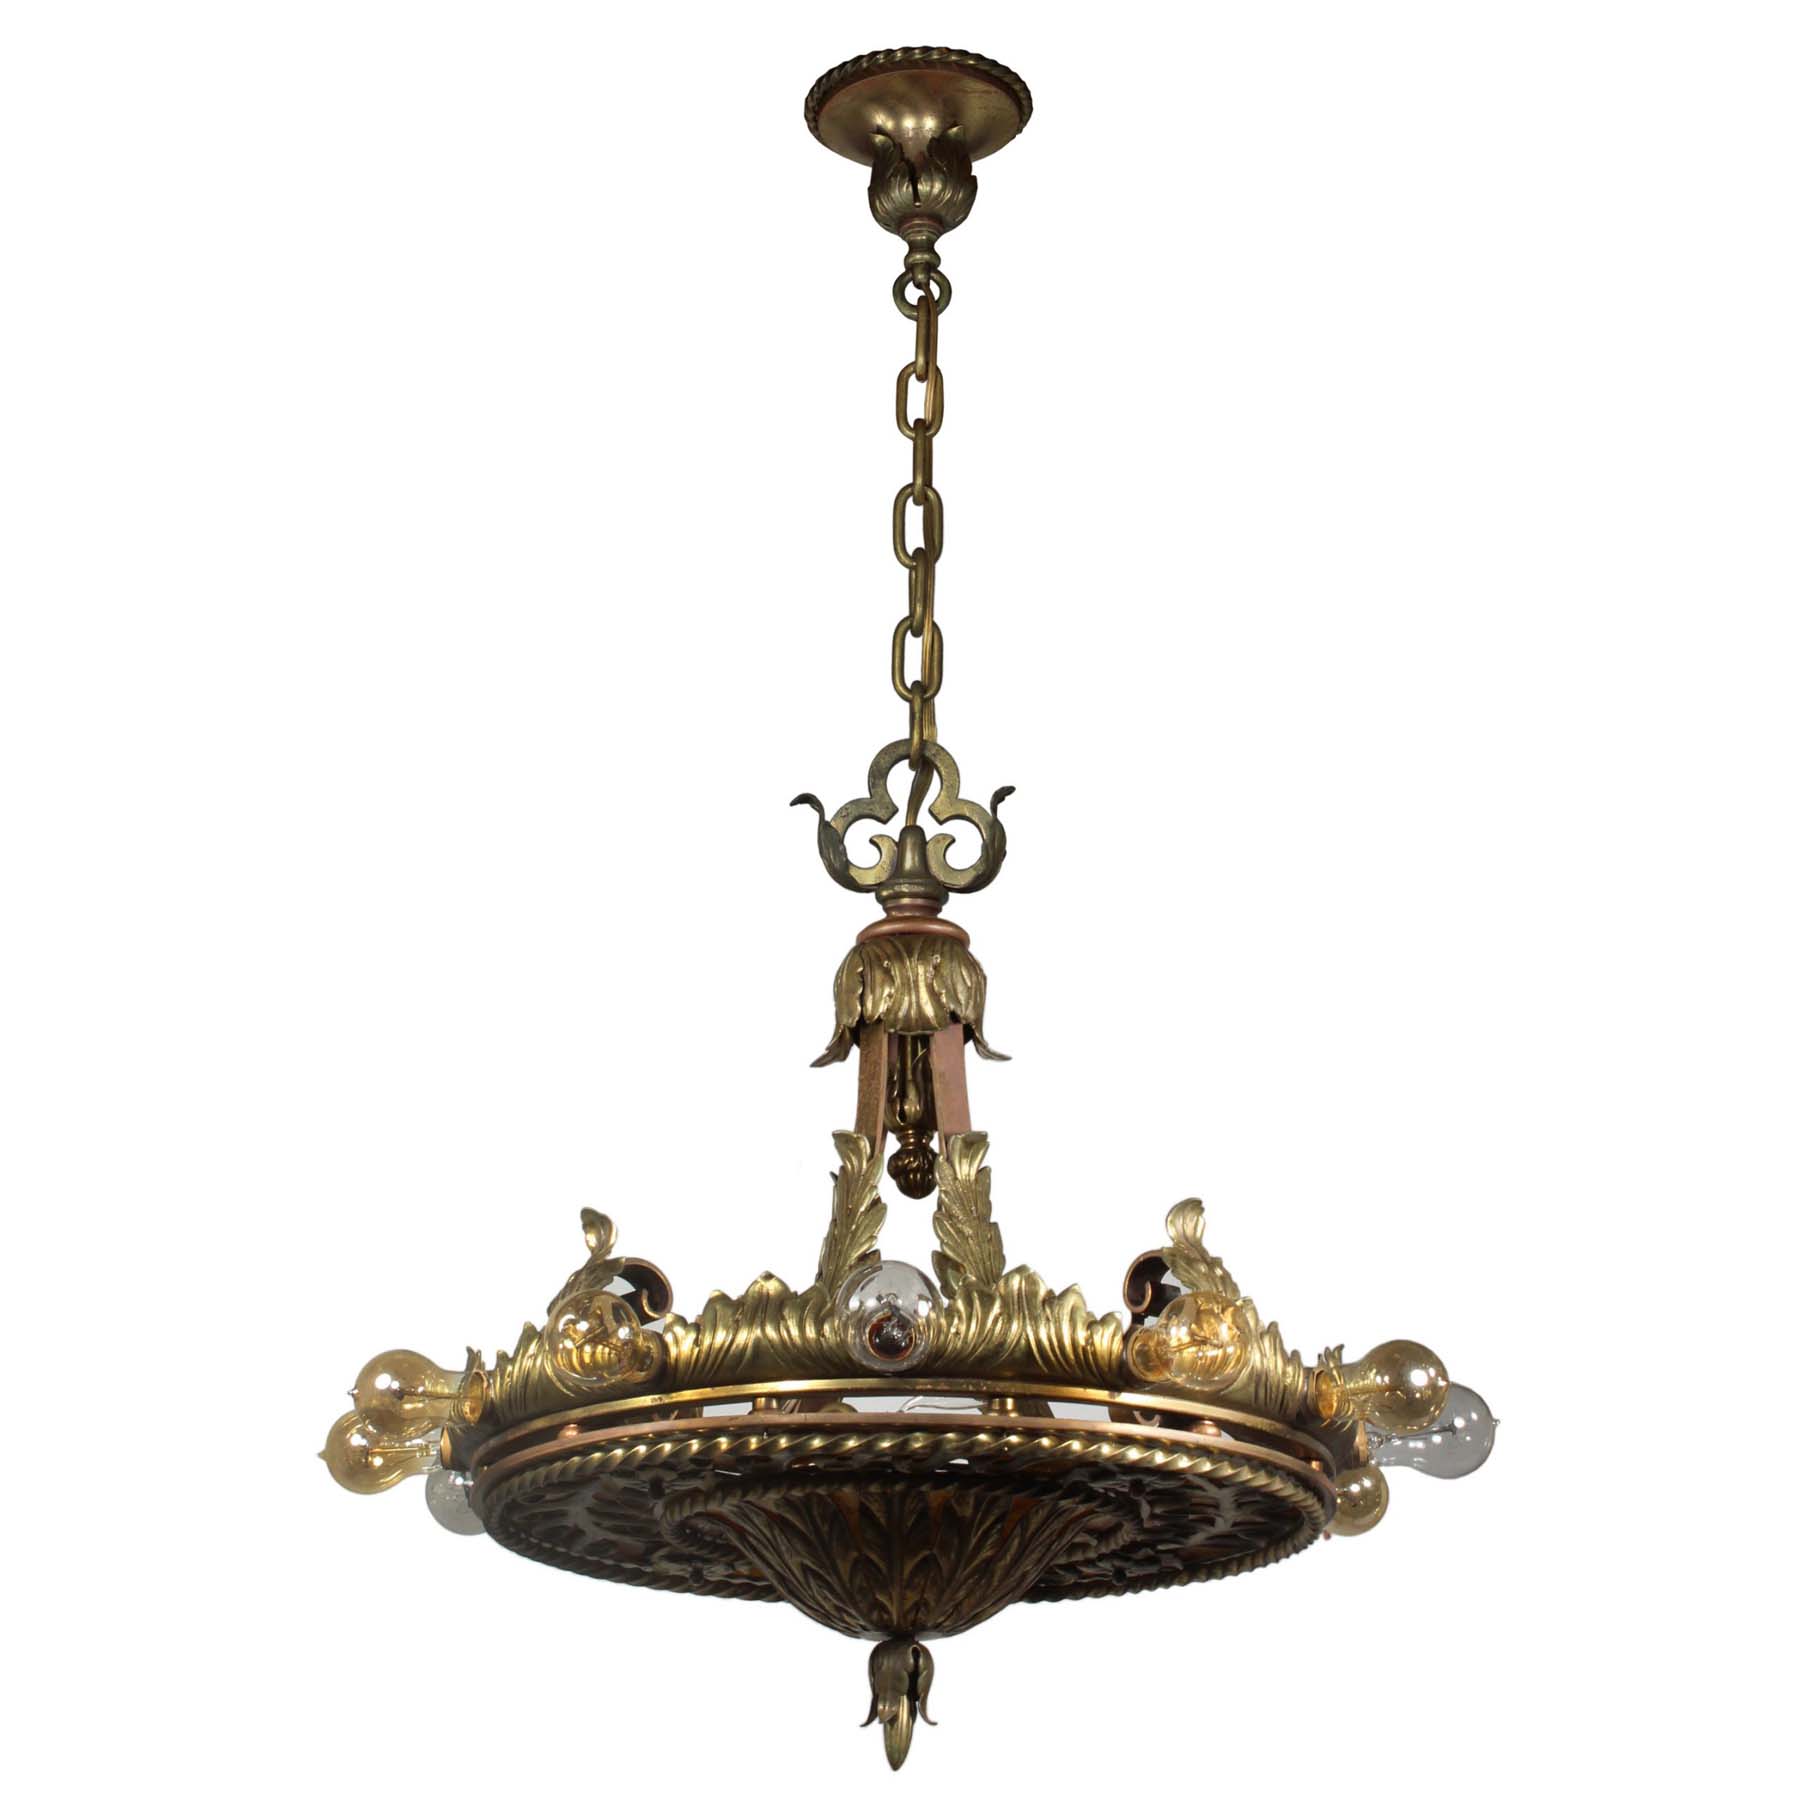 SOLD Substantial Antique Brass Chandelier with Mica -69297